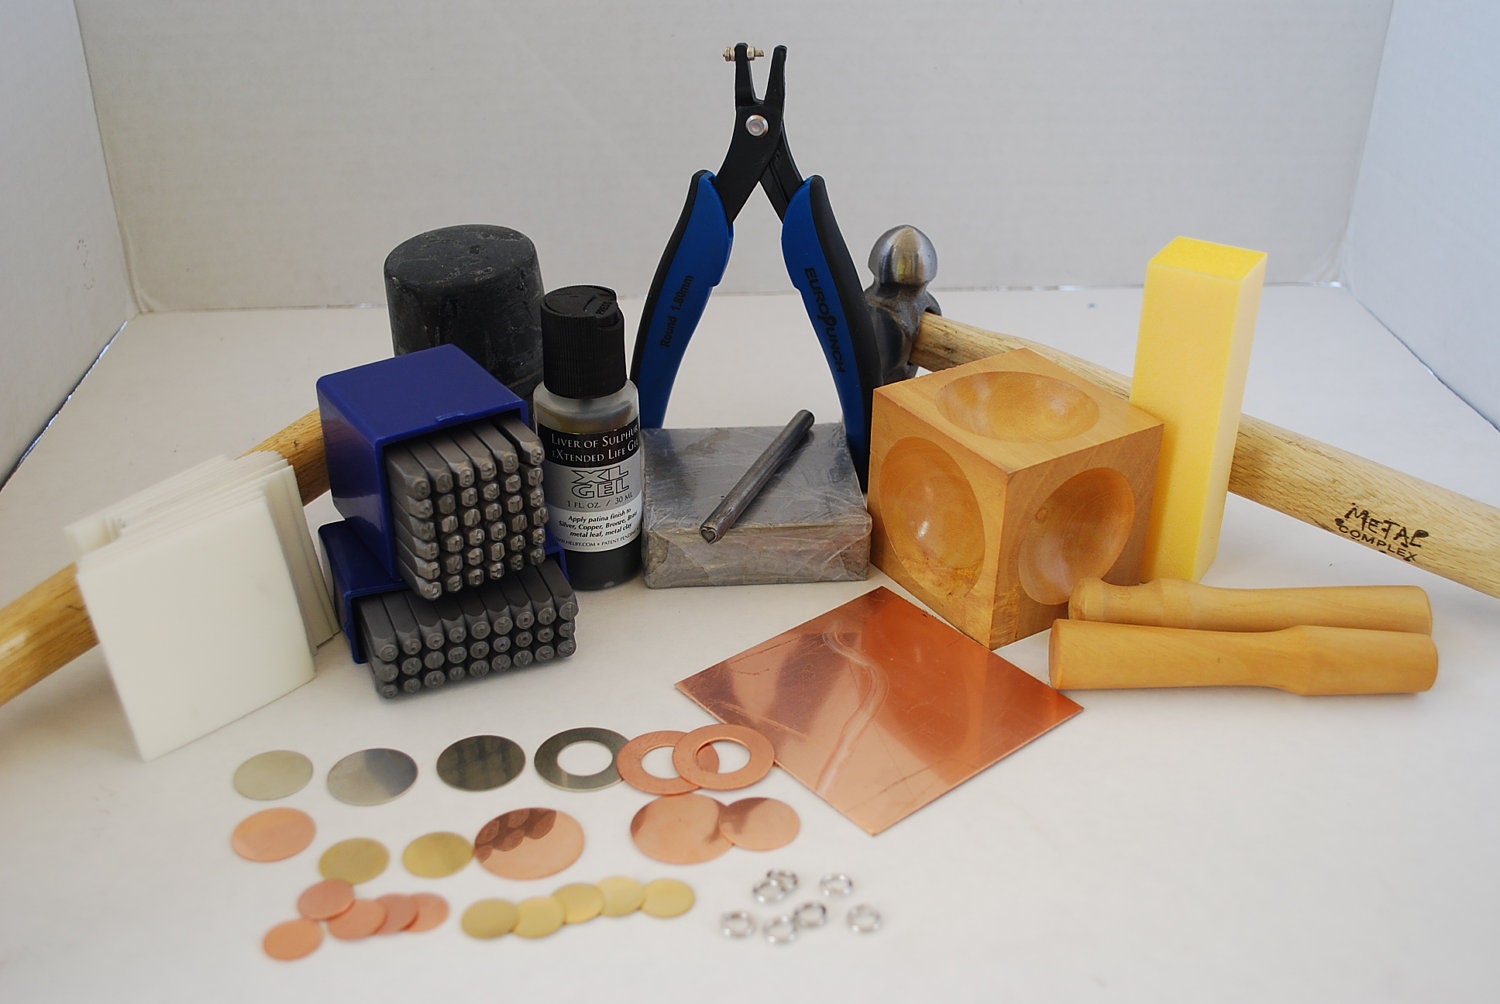 New* Metal Stamping Starter Kits. Choose from three kits, curated